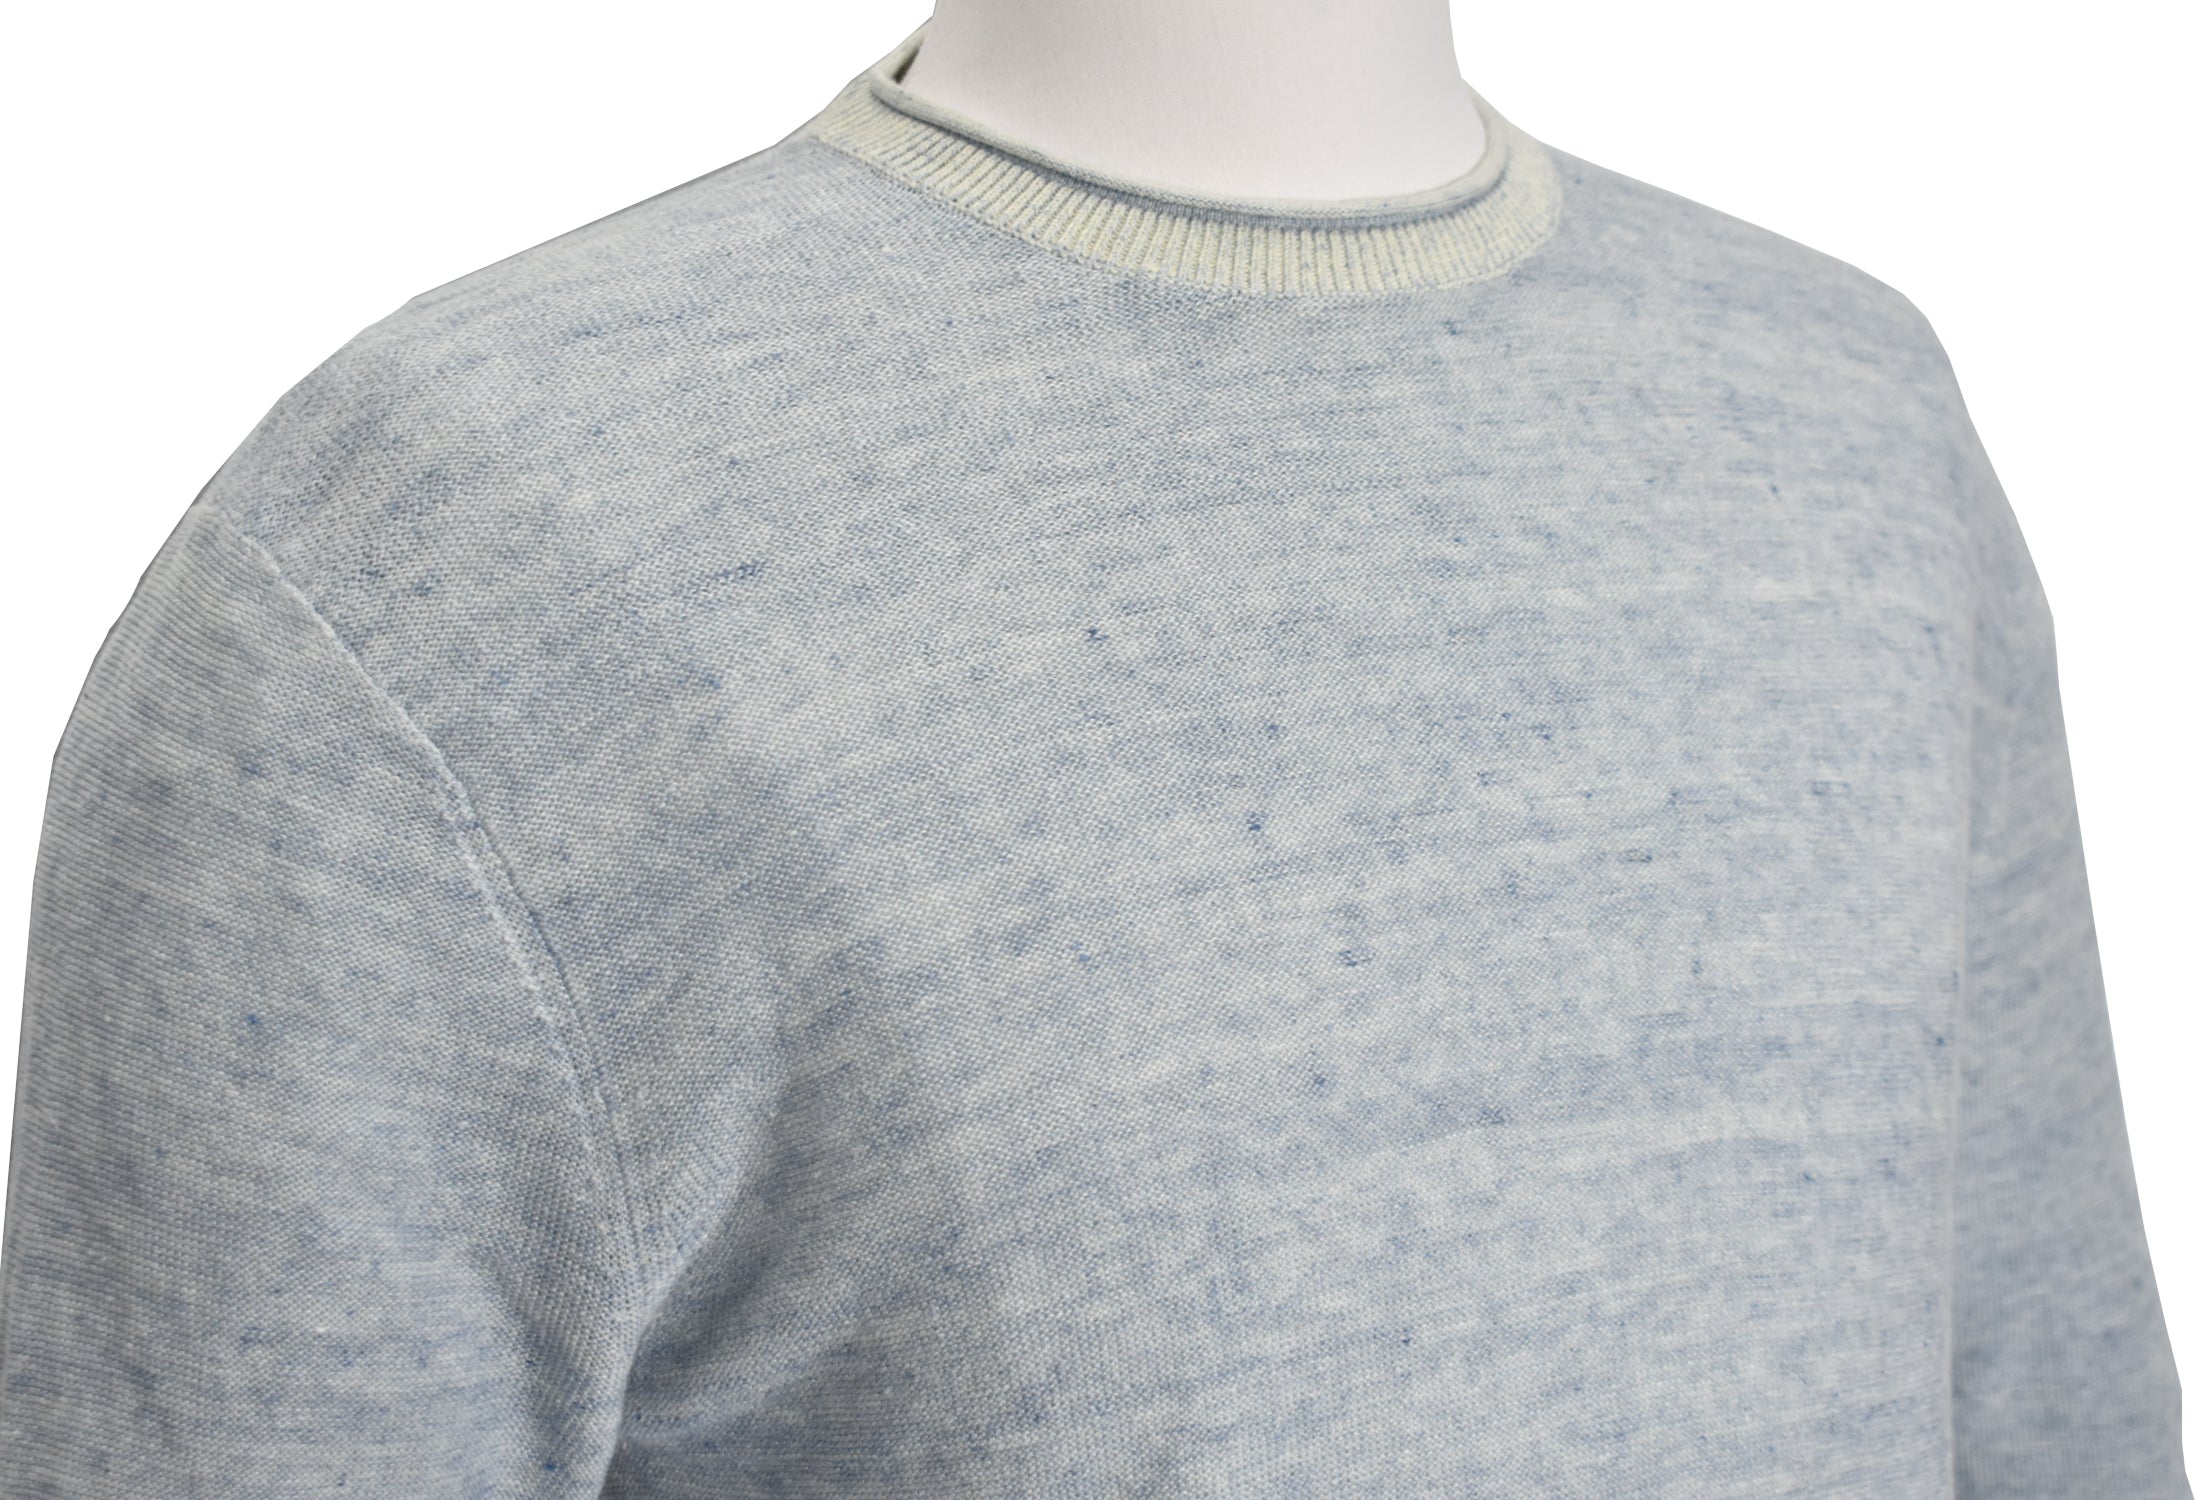 Treat yourself to everyday comfort and style with our ZB405 Boardwalk Washed Cotton Knit! Crafted from a unique blend of 50% cotton and 50% linen, you'll love how soft and comfortable this knit feels, plus its relaxed look. Finished with stylish ribbed cuffs and bands with a curled knit effect and a classic fit, this knit is perfect for everyday wear. By Marcello